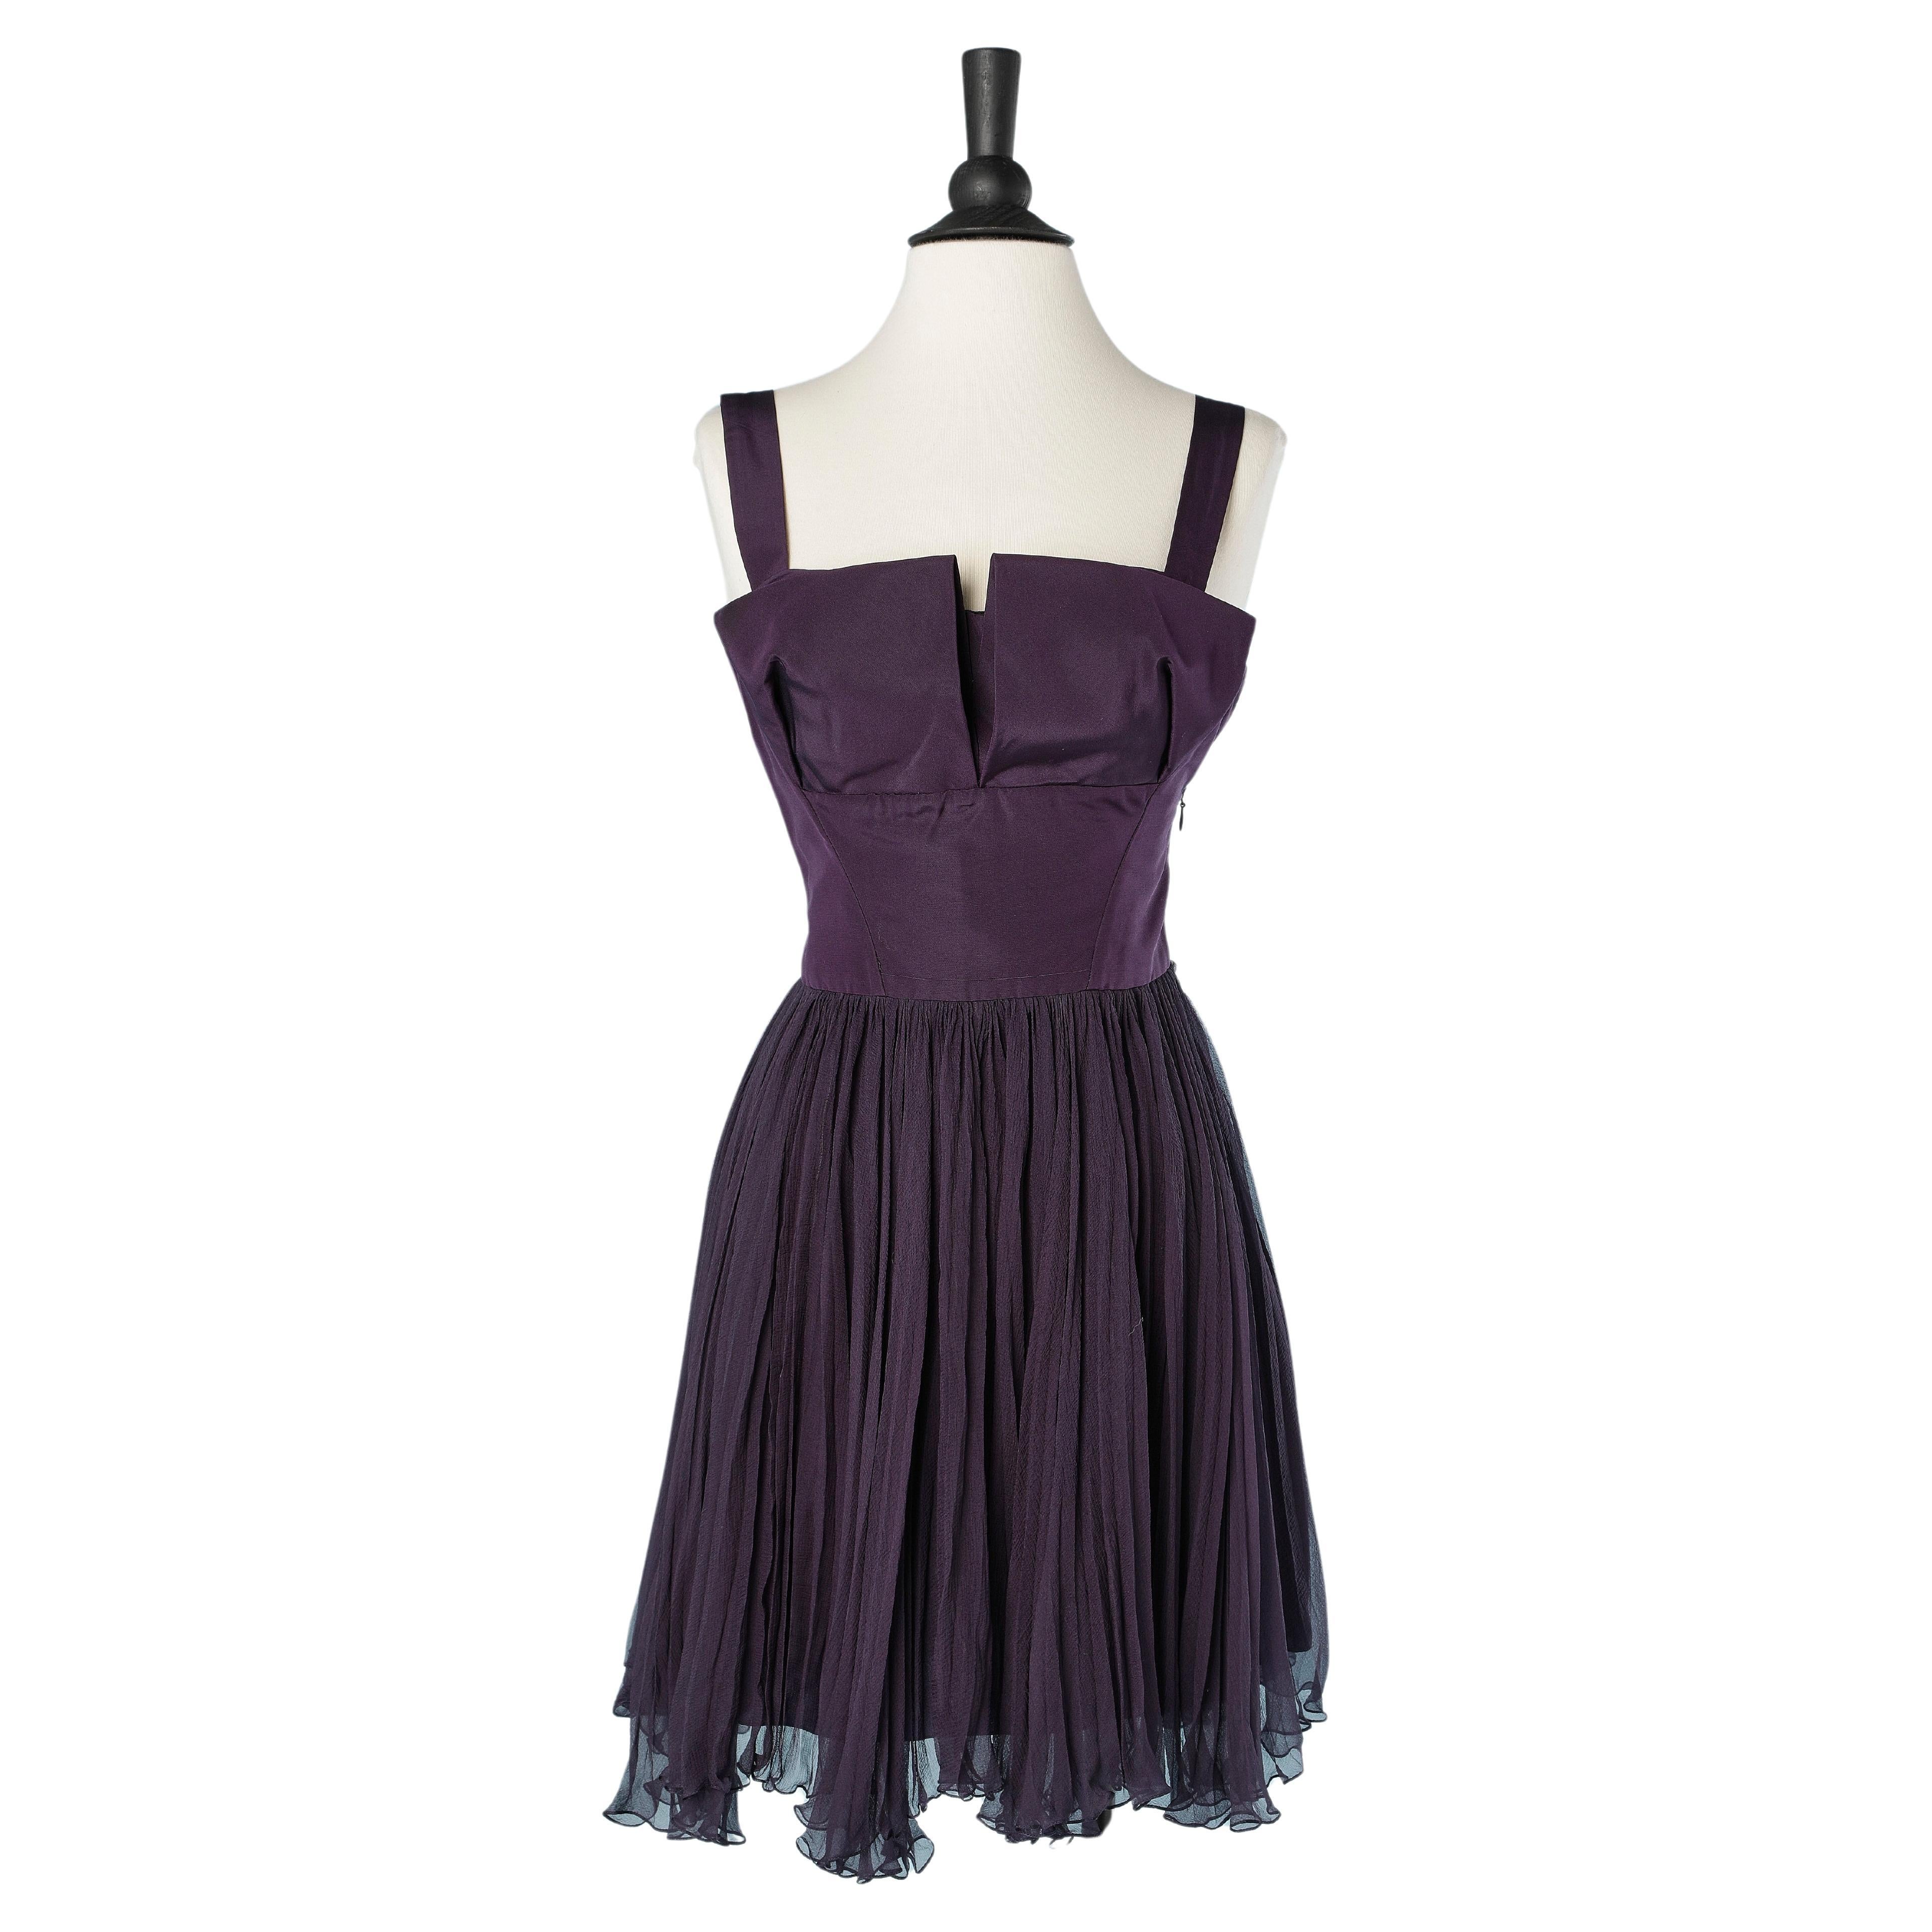 Deep purple bustier cocktail dress Christian Dior Cruise 2012 For Sale